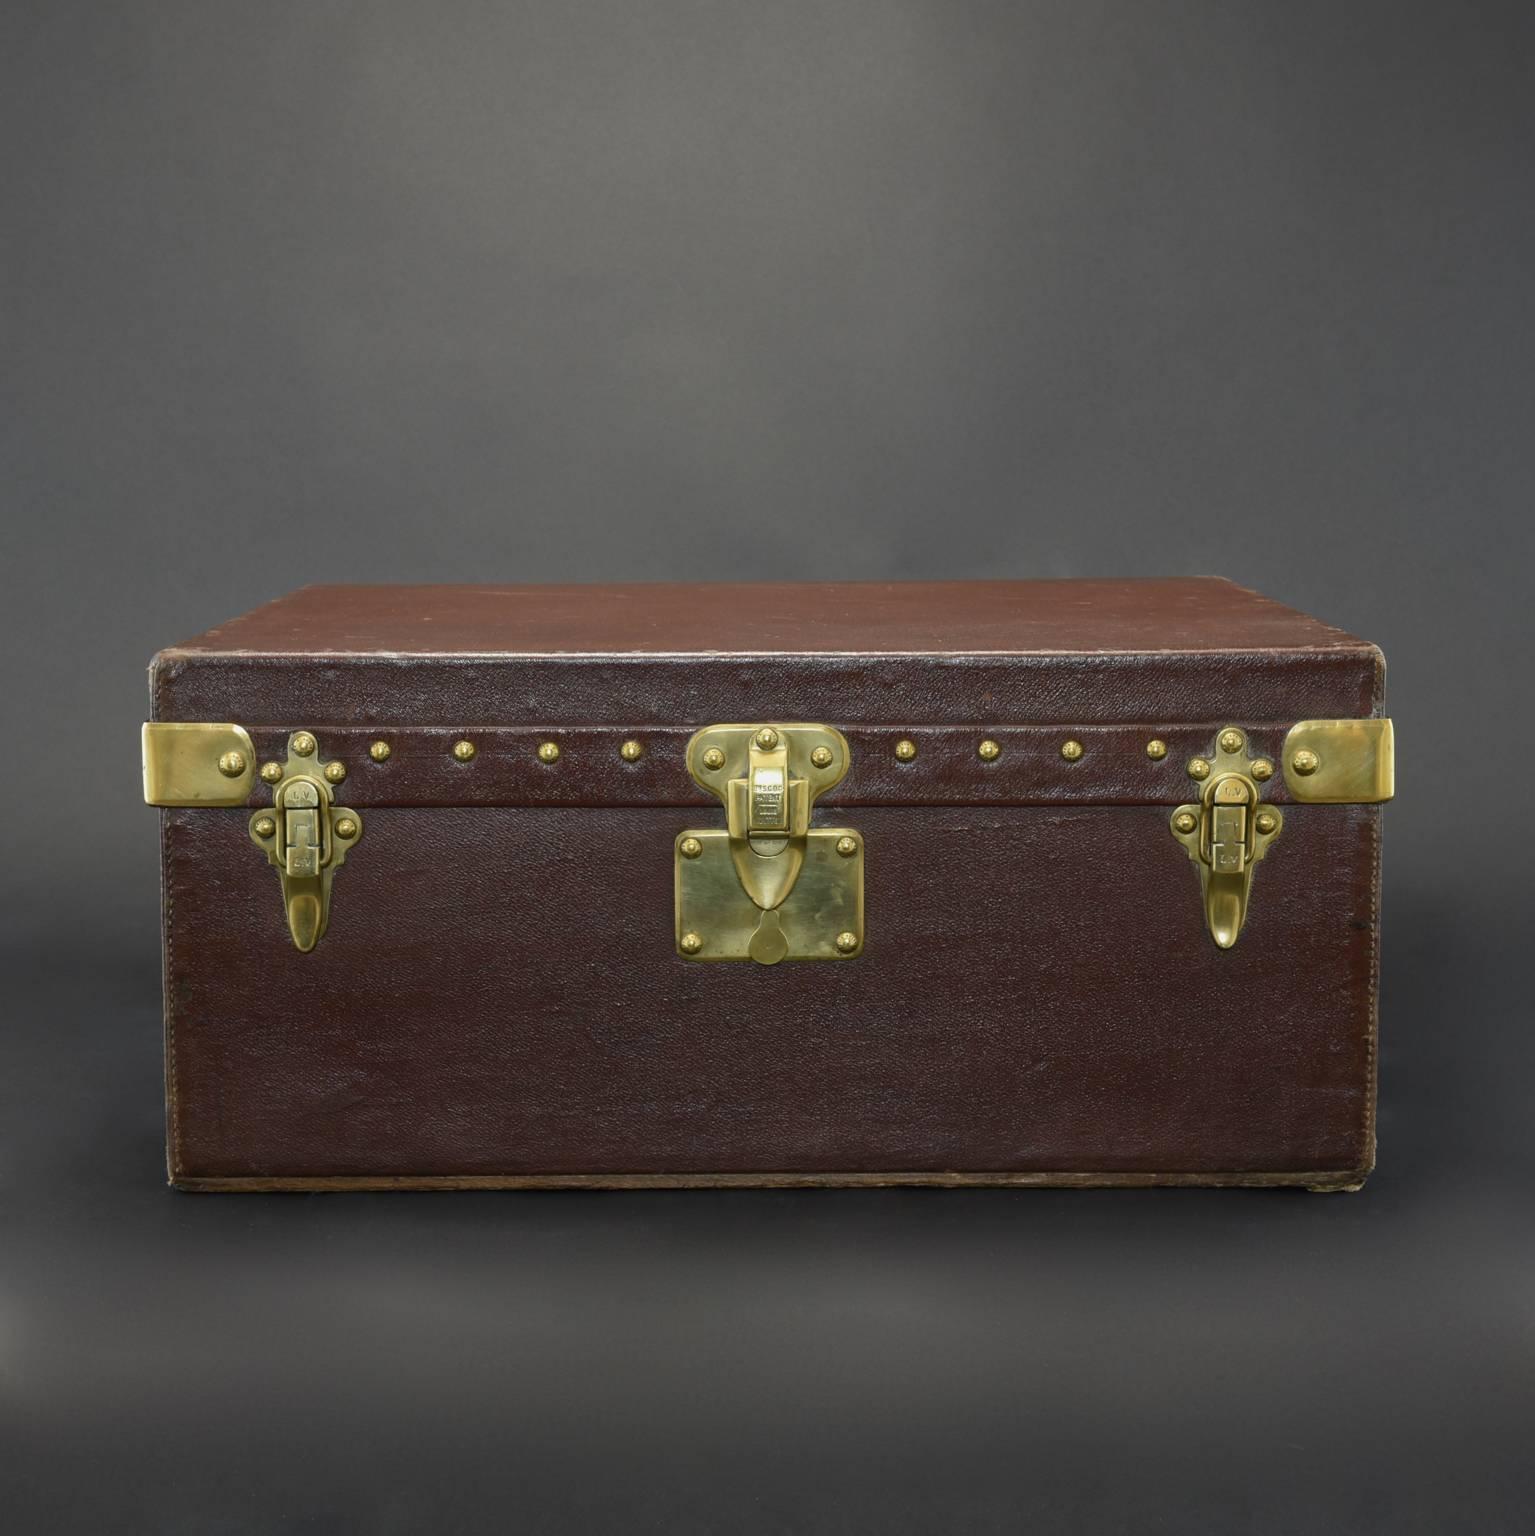 Rare Louis Vuitton motor case in tobacco Vuittonite with brass fittings and original cotton lining to the interior; circa 1905. Parts of the brown Vuittonite canvas have lifted on the left hand side of the case but although worn in places it remains